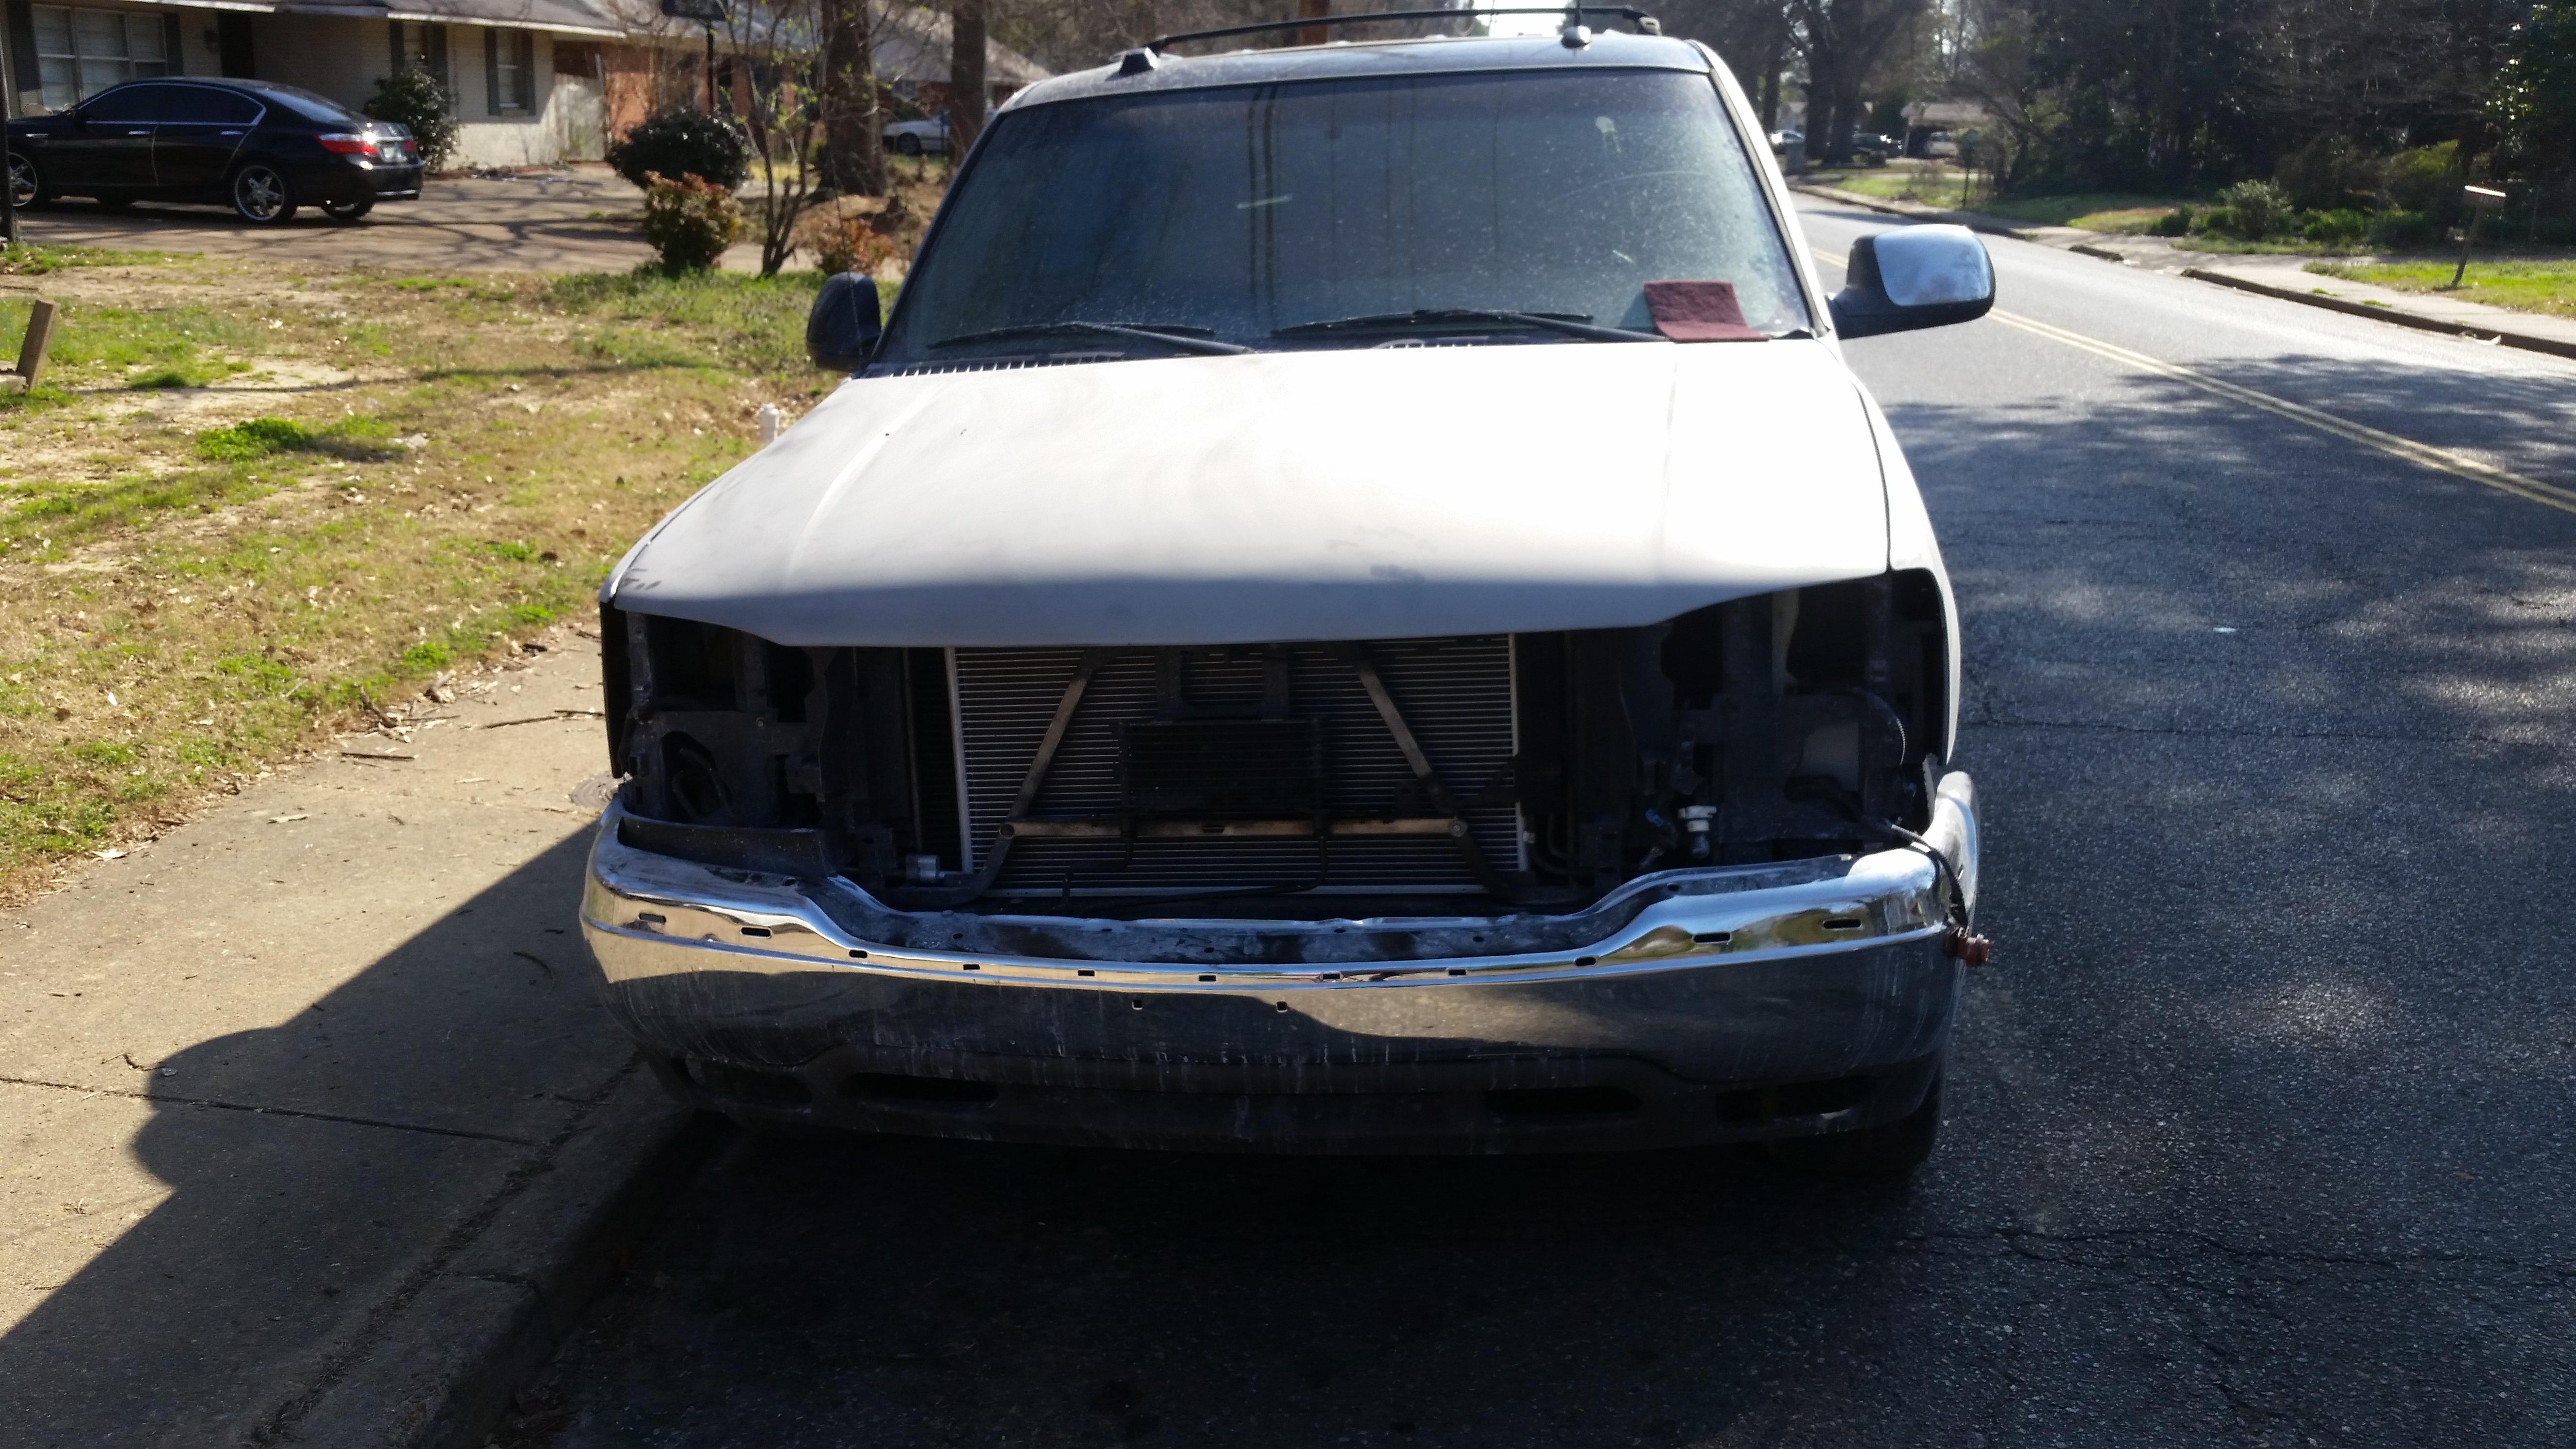 2005 yukon xl was smashed in front, we've pull frame, replaced entire front cap